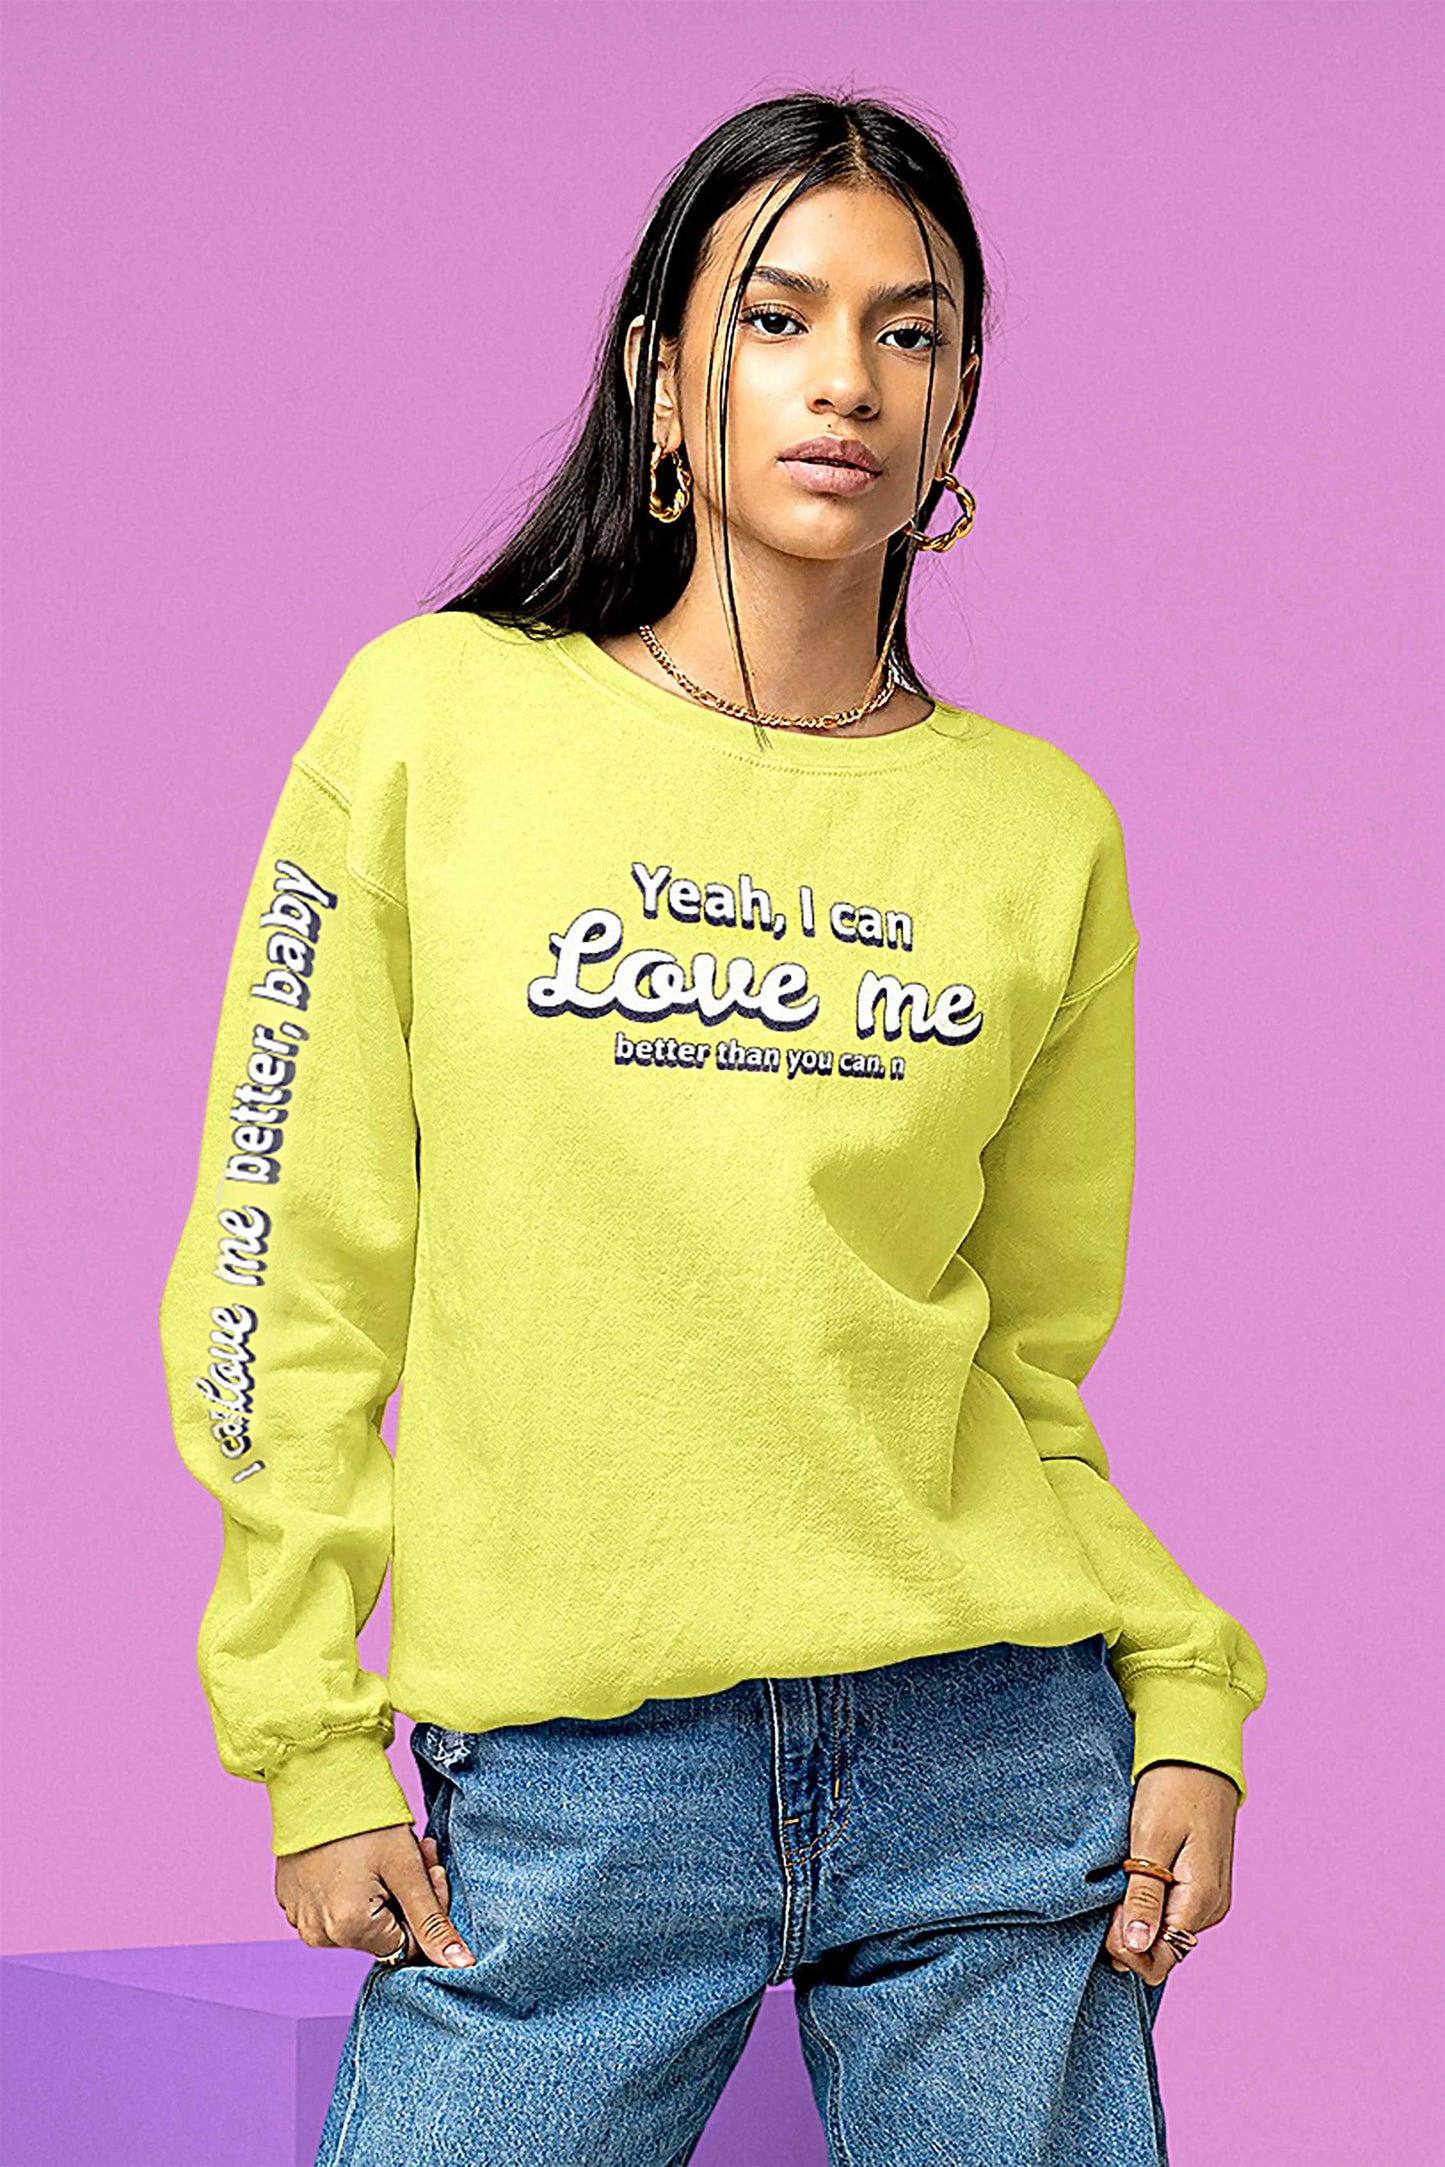 This is The Remix Sweatshirt I CAN LOVE ME BETTER THAT YOU CAN - Unisex Sweatshirt in Neon Lime.jpg